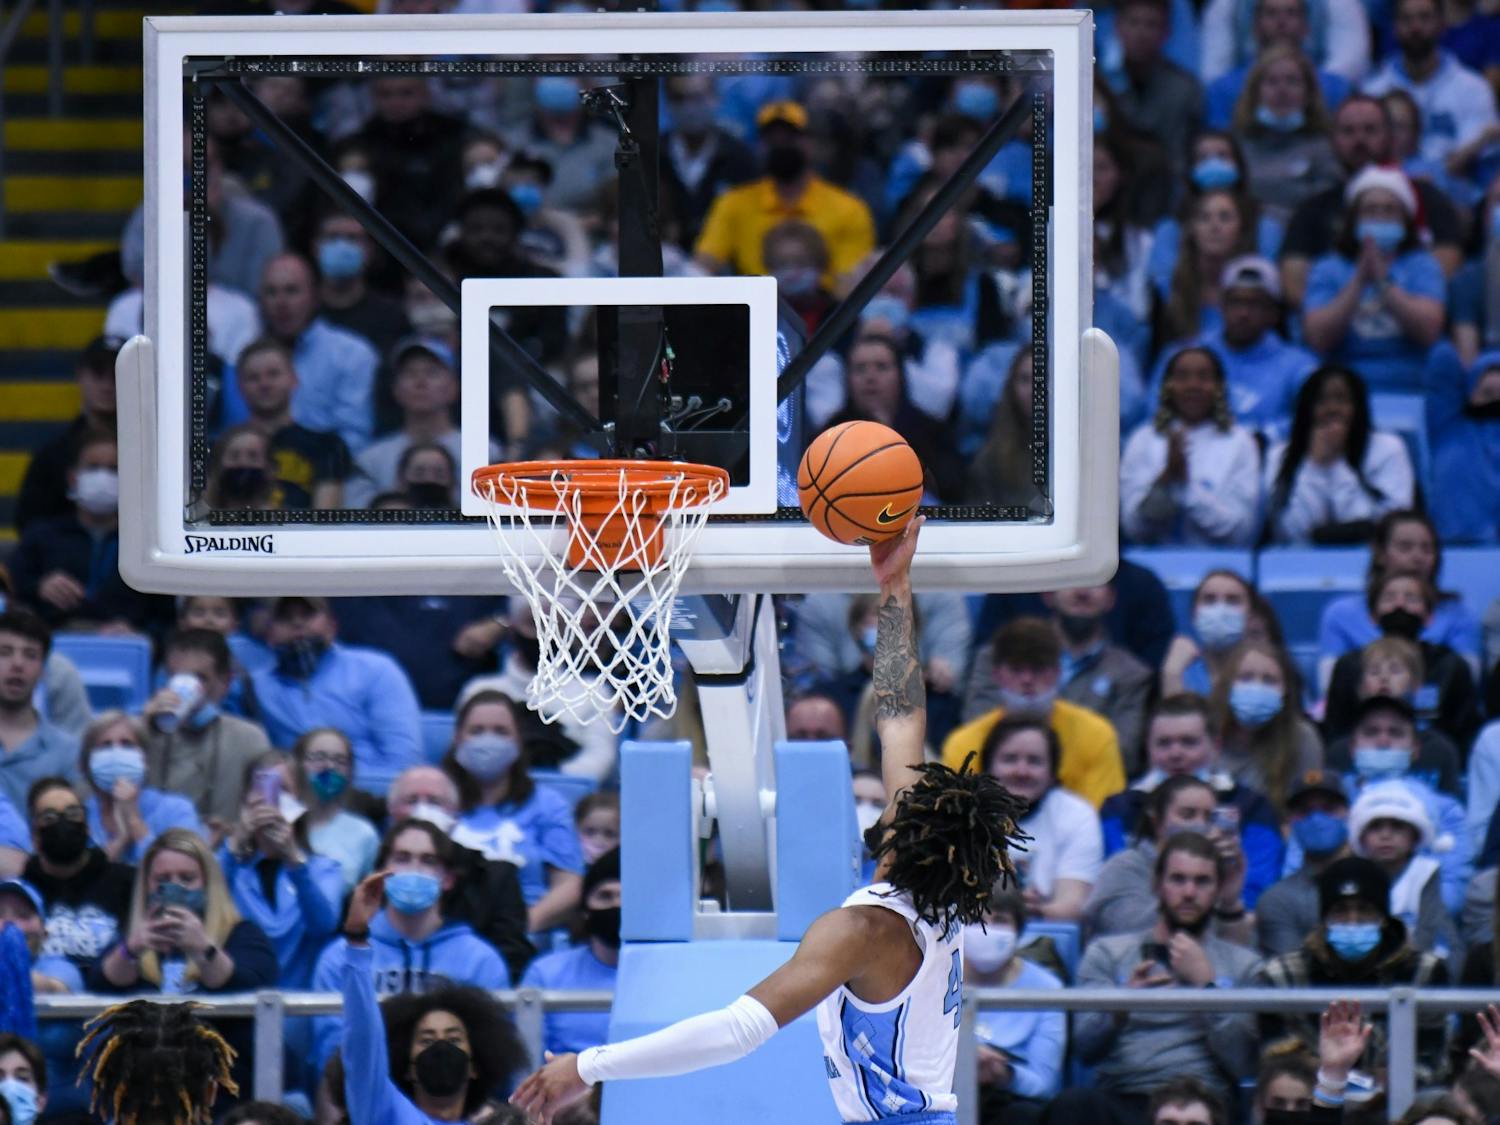 Sophomore guard RJ Davis (4) scores a point at the game against Appalachian State in the Dean E. Smith Center on Dec 21, 2021. UNC won 70-50.